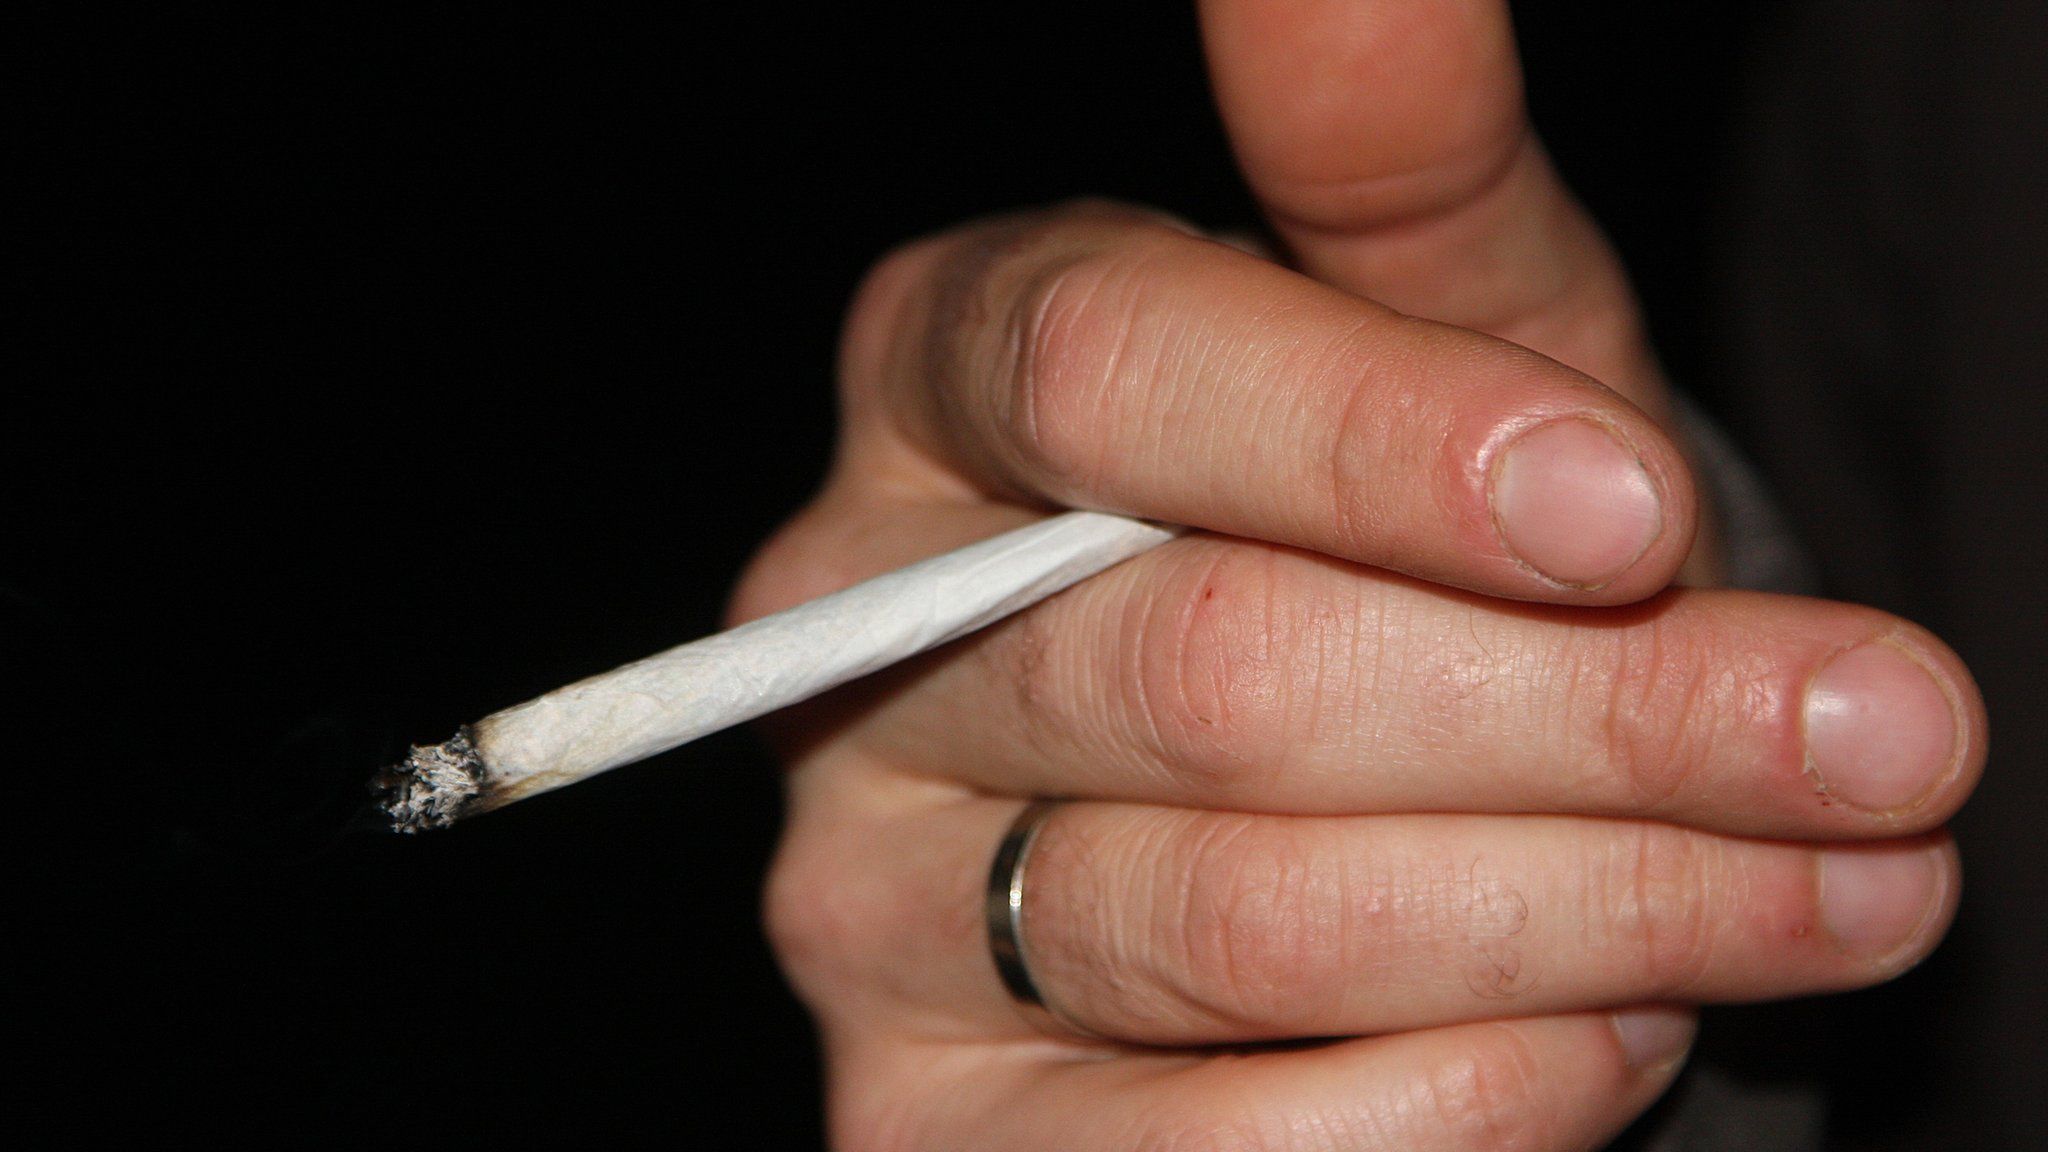 A hand holding a rolled cigarette